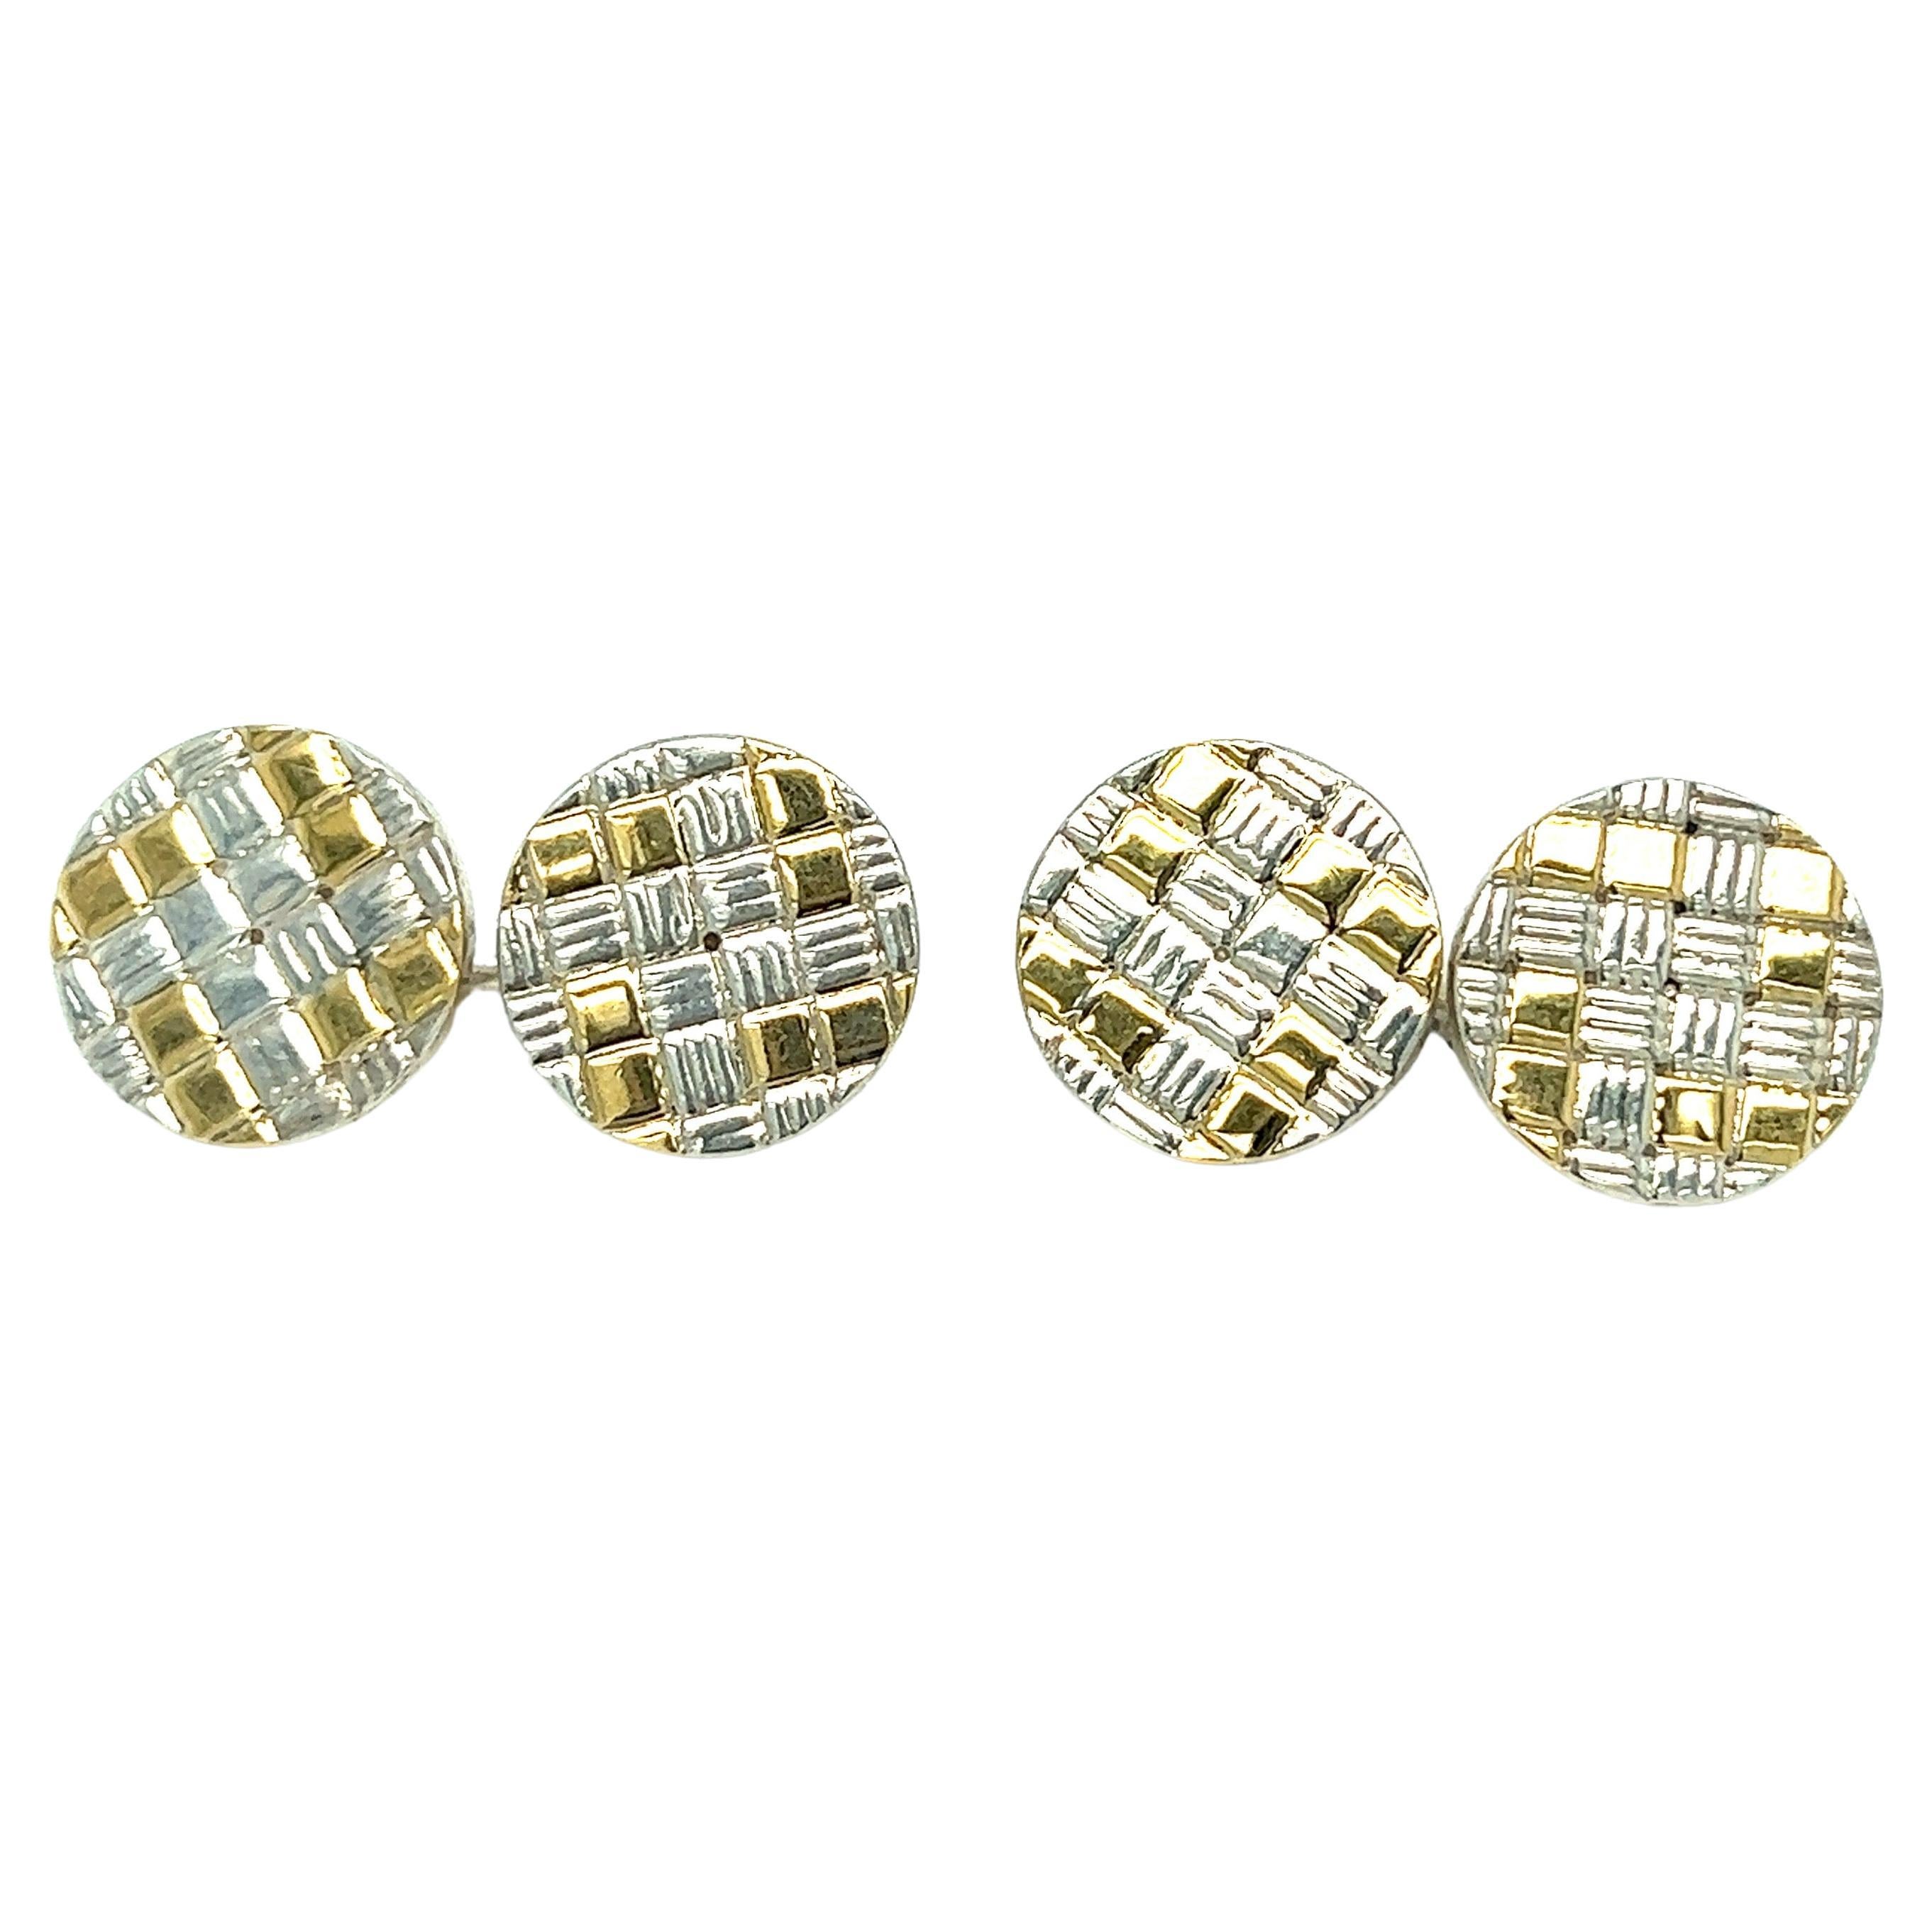 Cartier Silver and Gold Checkered Small Cufflinks